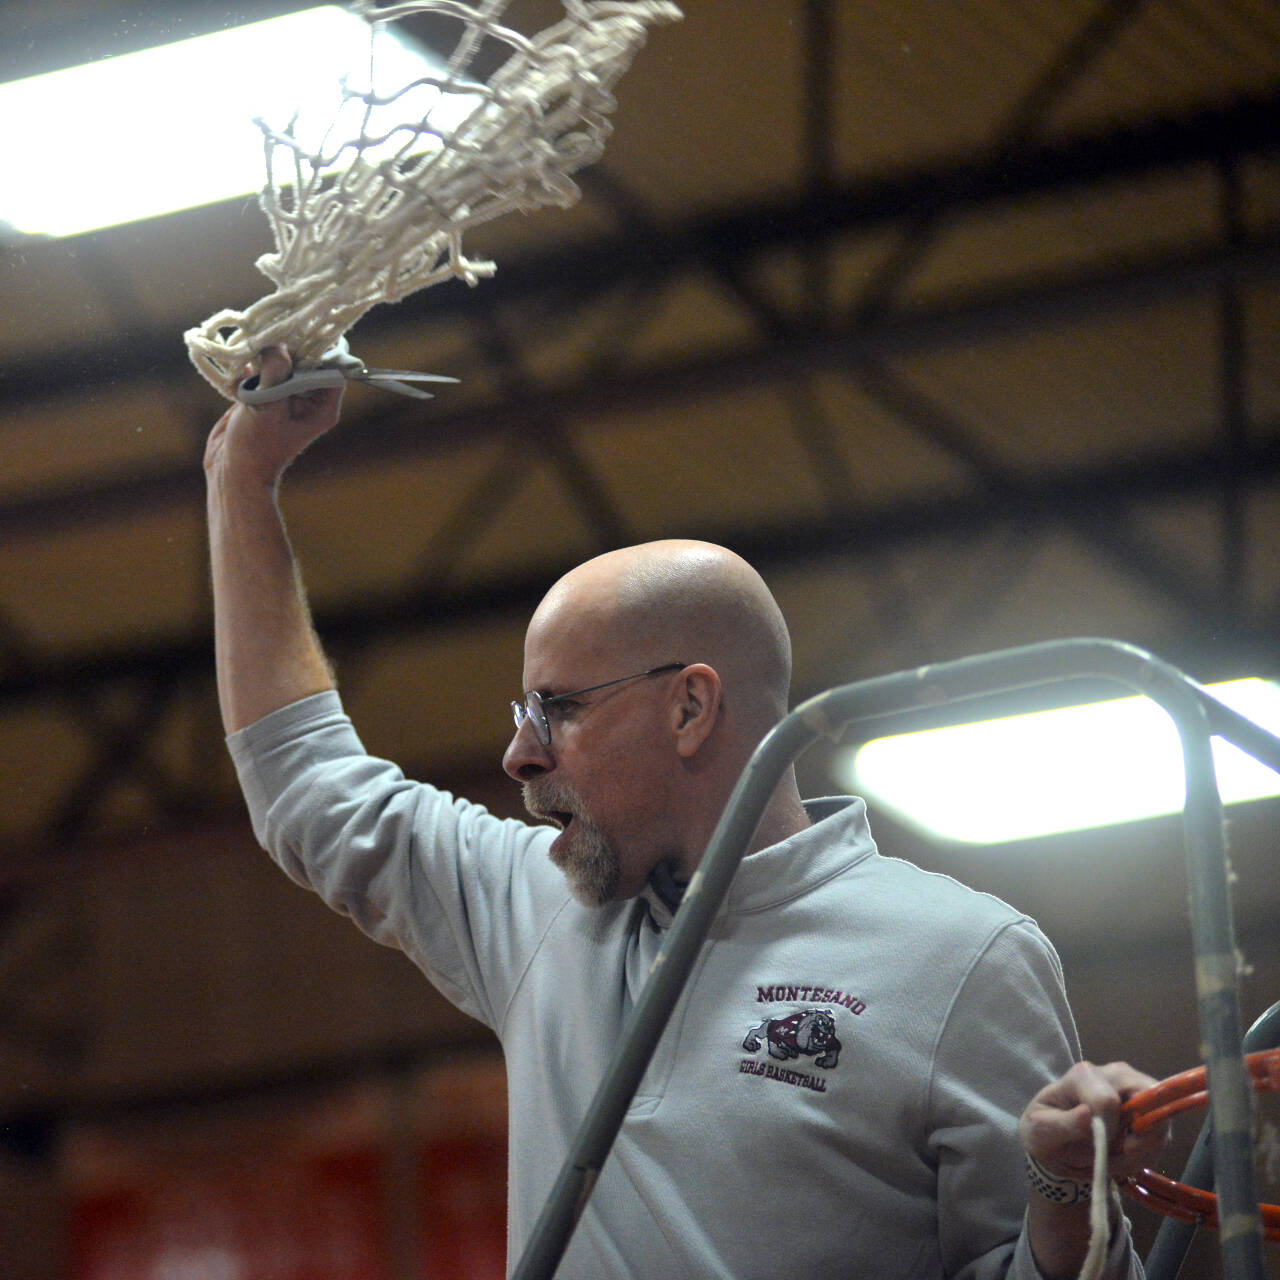 RYAN SPARKS | THE DAILY WORLD Montesano head coach Mark Mansfield cheers after cutting down the net following the Bulldogs’ 72-36 win over Seton Catholic in the 1A District 4 Championship game on Friday at Castle Rock High School.